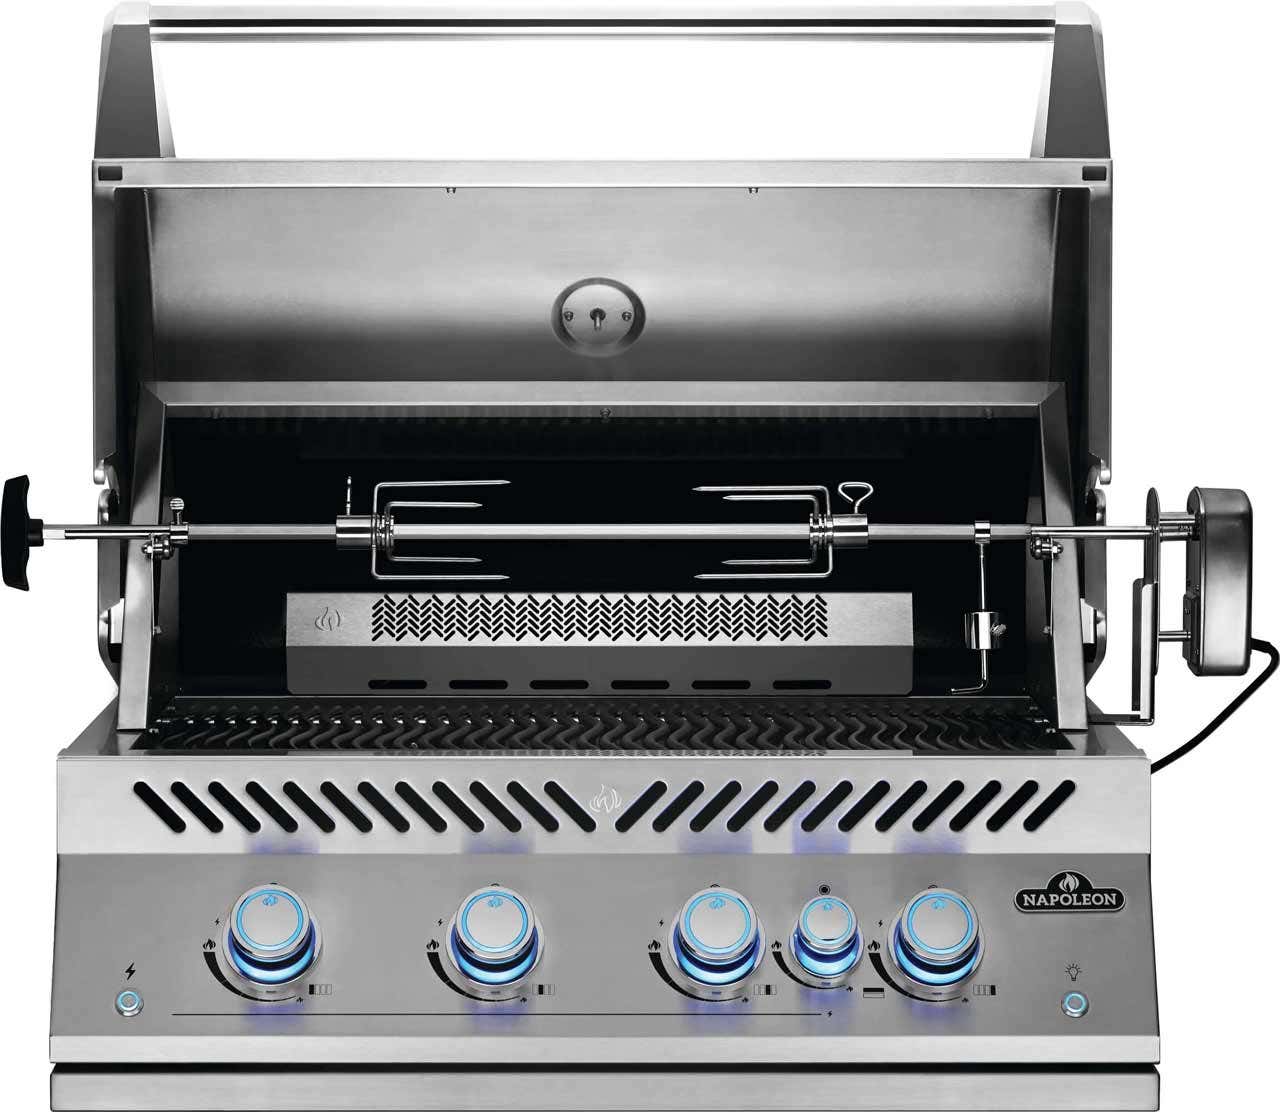 Napoleon Grills 32 inch 700 Built-In Gas Grill Head with Infrared Rear Rotisserie Burner Outdoor Grills